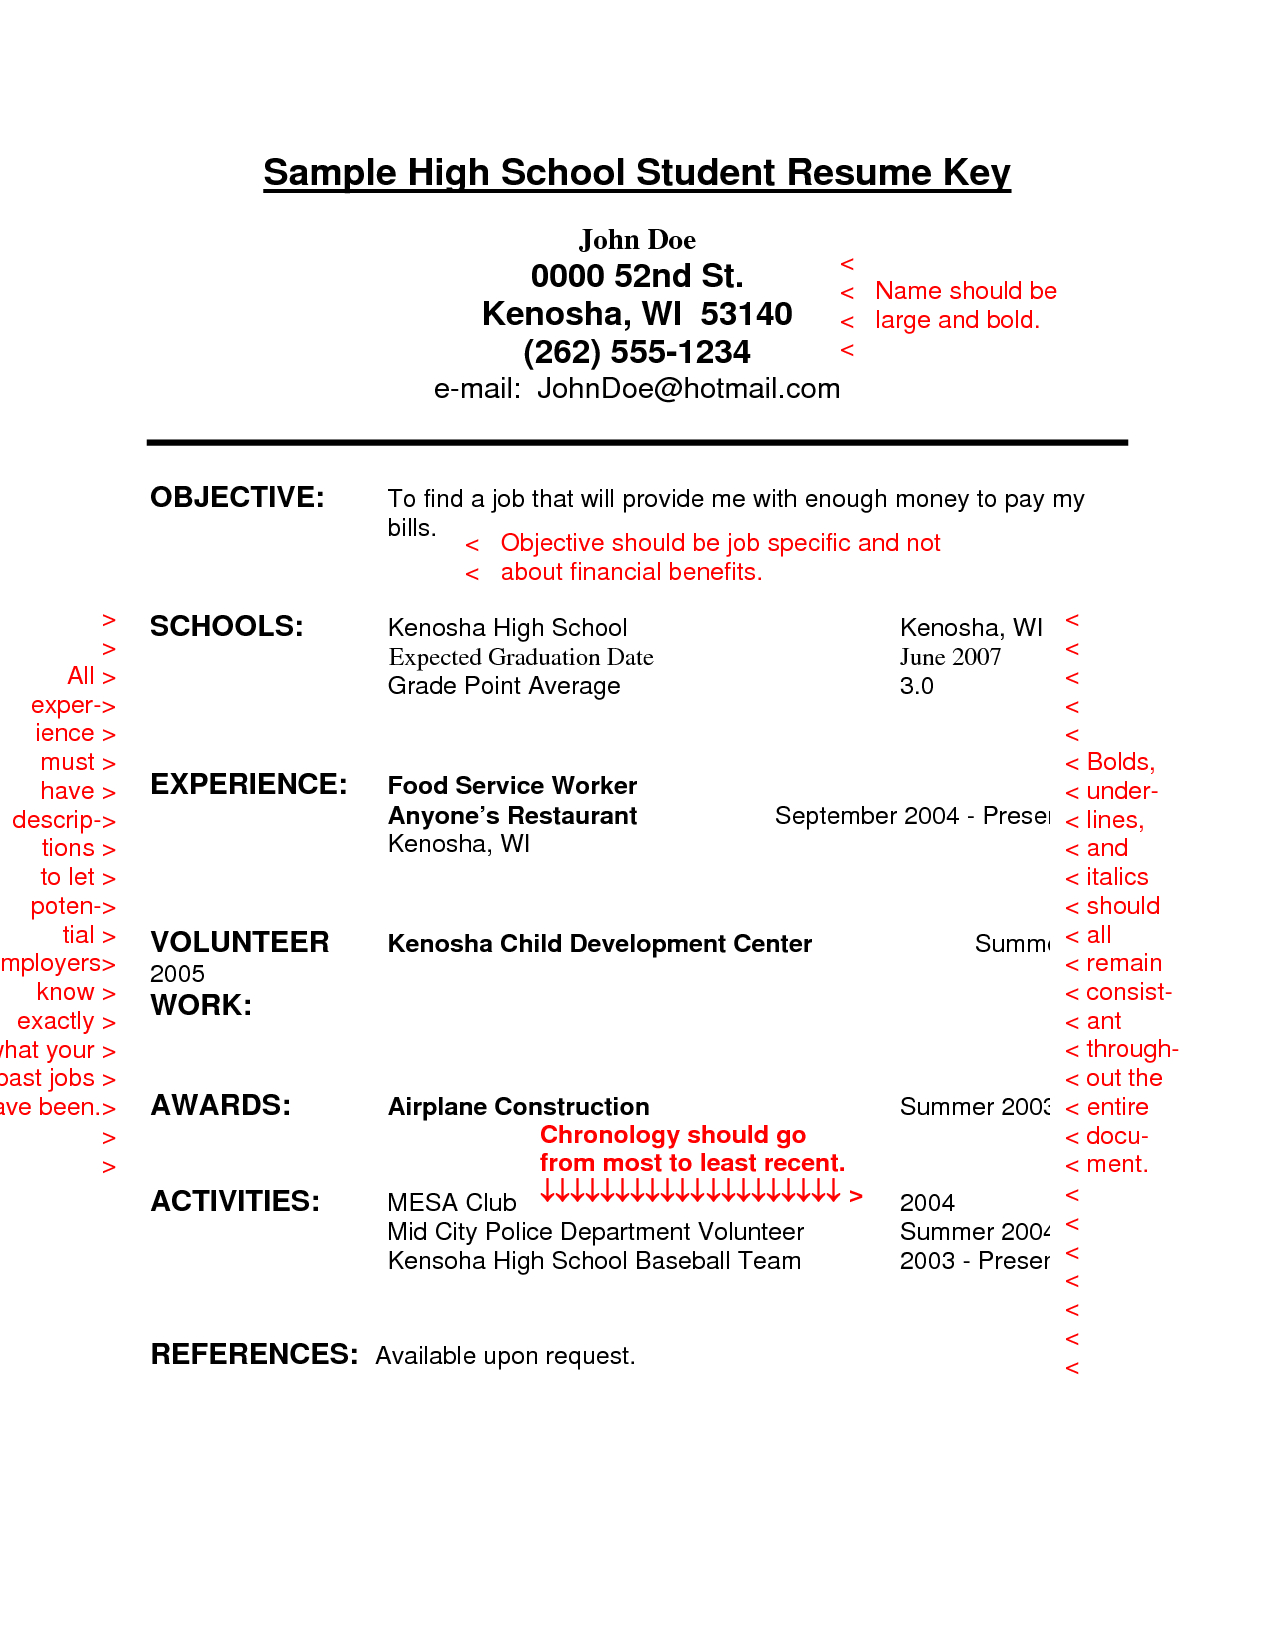 Student Resume Template Resumes For Students In High School Radiovkmtk